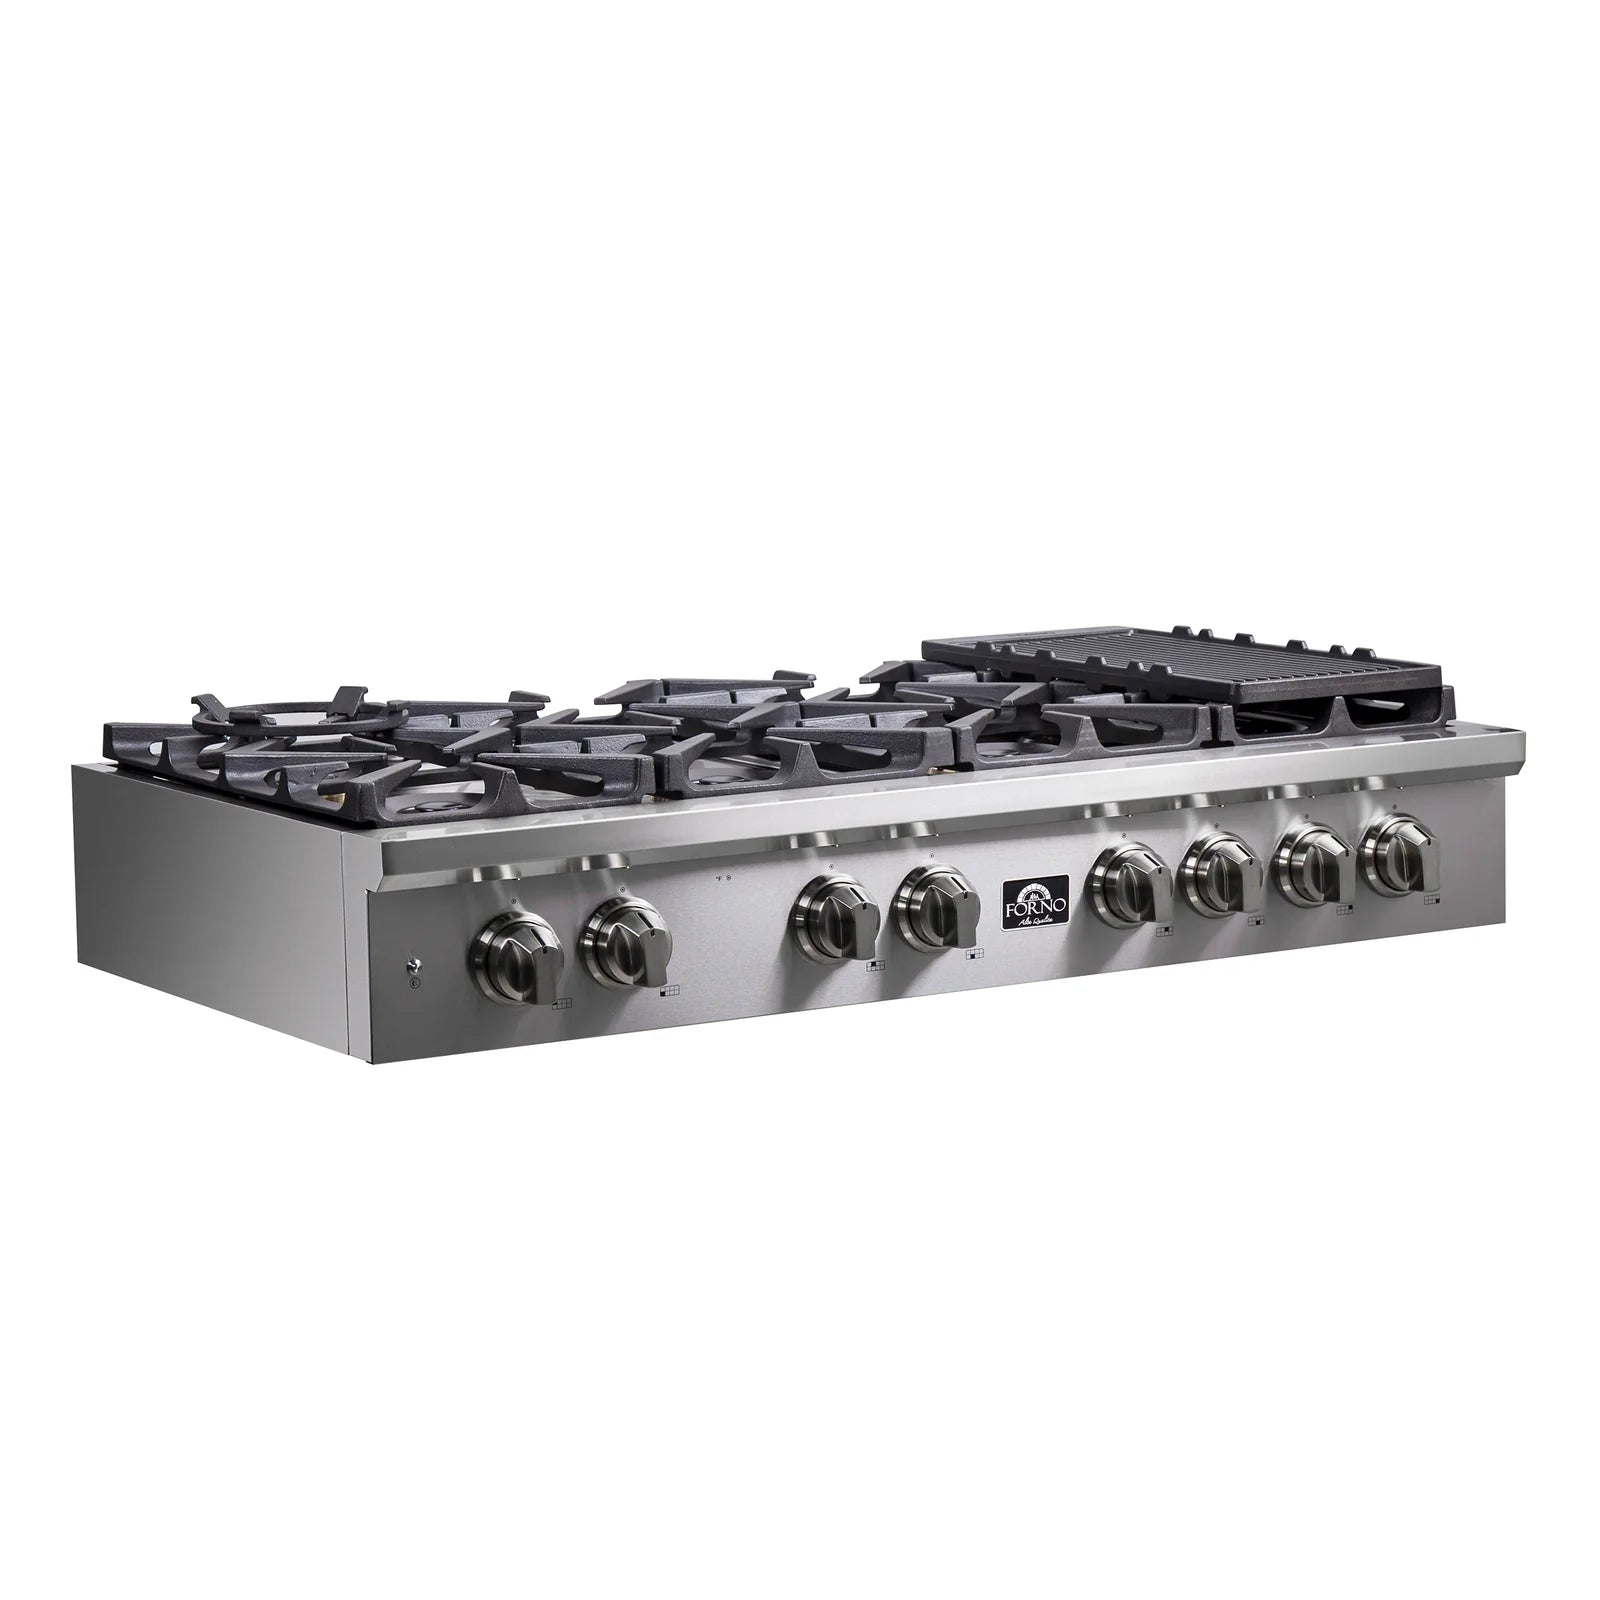 Forno Spezia 48-Inch Cooktop, 8 Burners. Wok Ring and Grill/Griddle in Stainless Steel - FCTGS5751-48